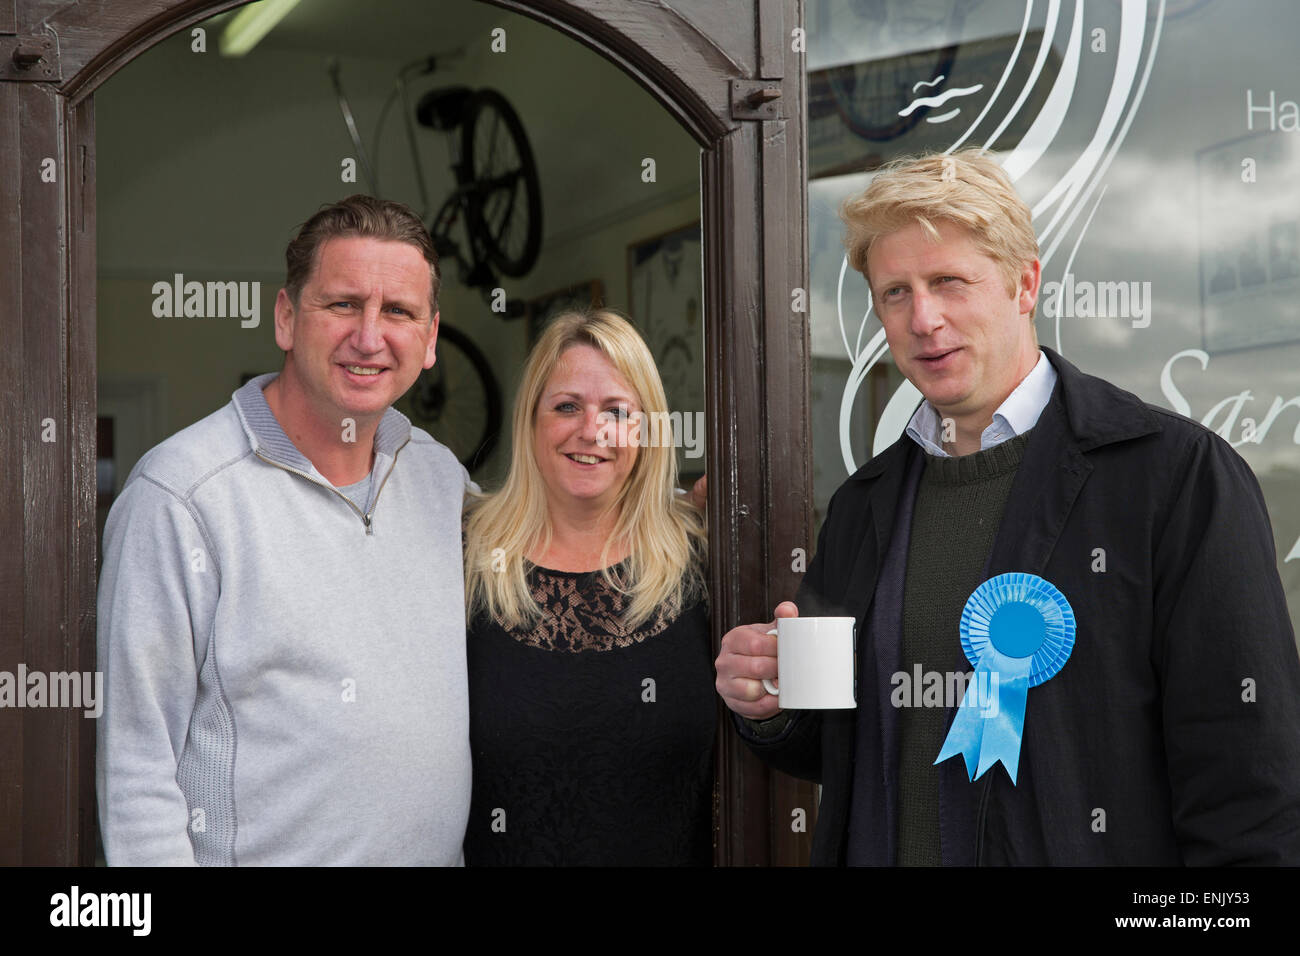 Jo Johnson MP poses with locals in Petts Wood on Election Day. Stock Photo